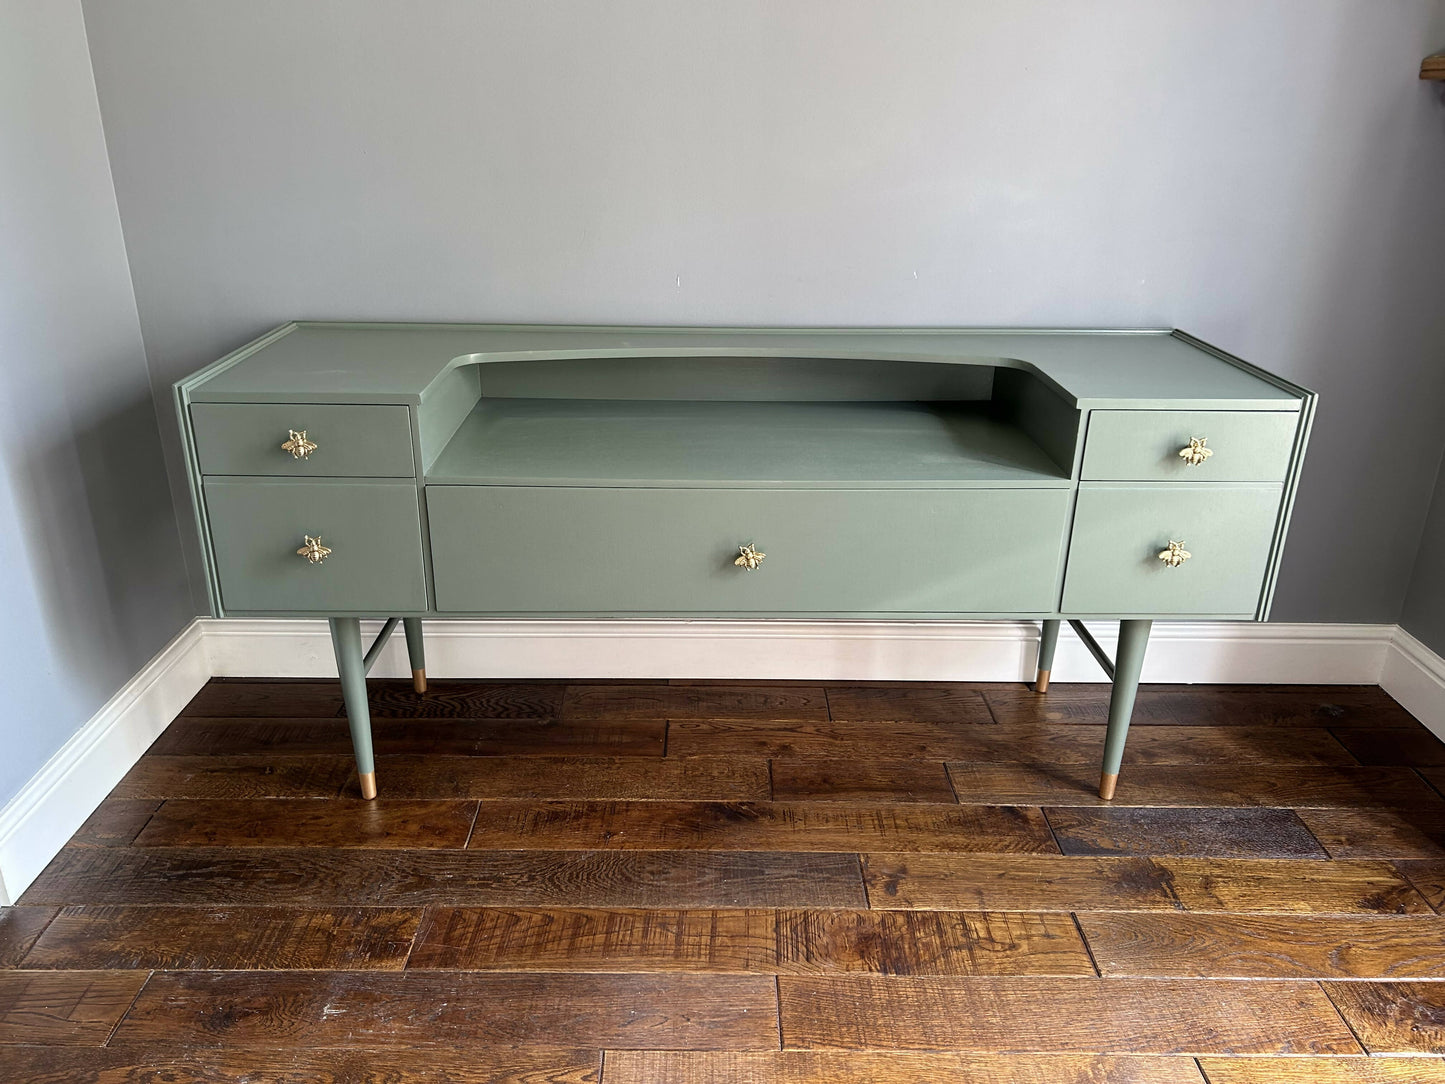 **NOW SOLD**Restyled Meredew furniture sideboard in Serenity green Satin